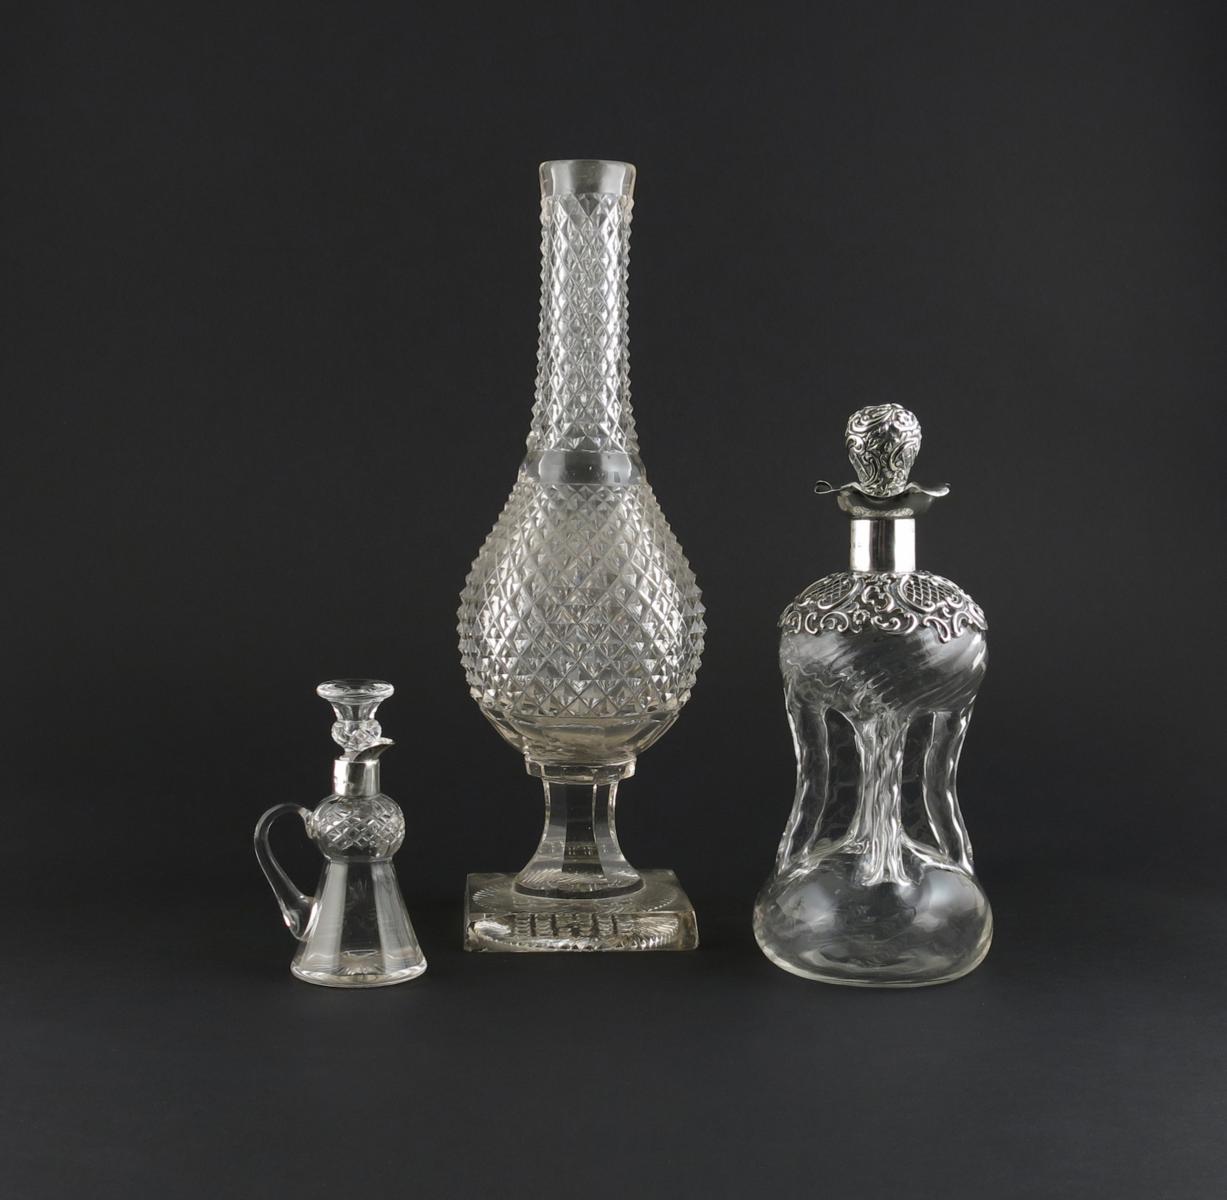 A cruciform silver-mounted carafe and stopper, 19th century, with silver pierced panels and C